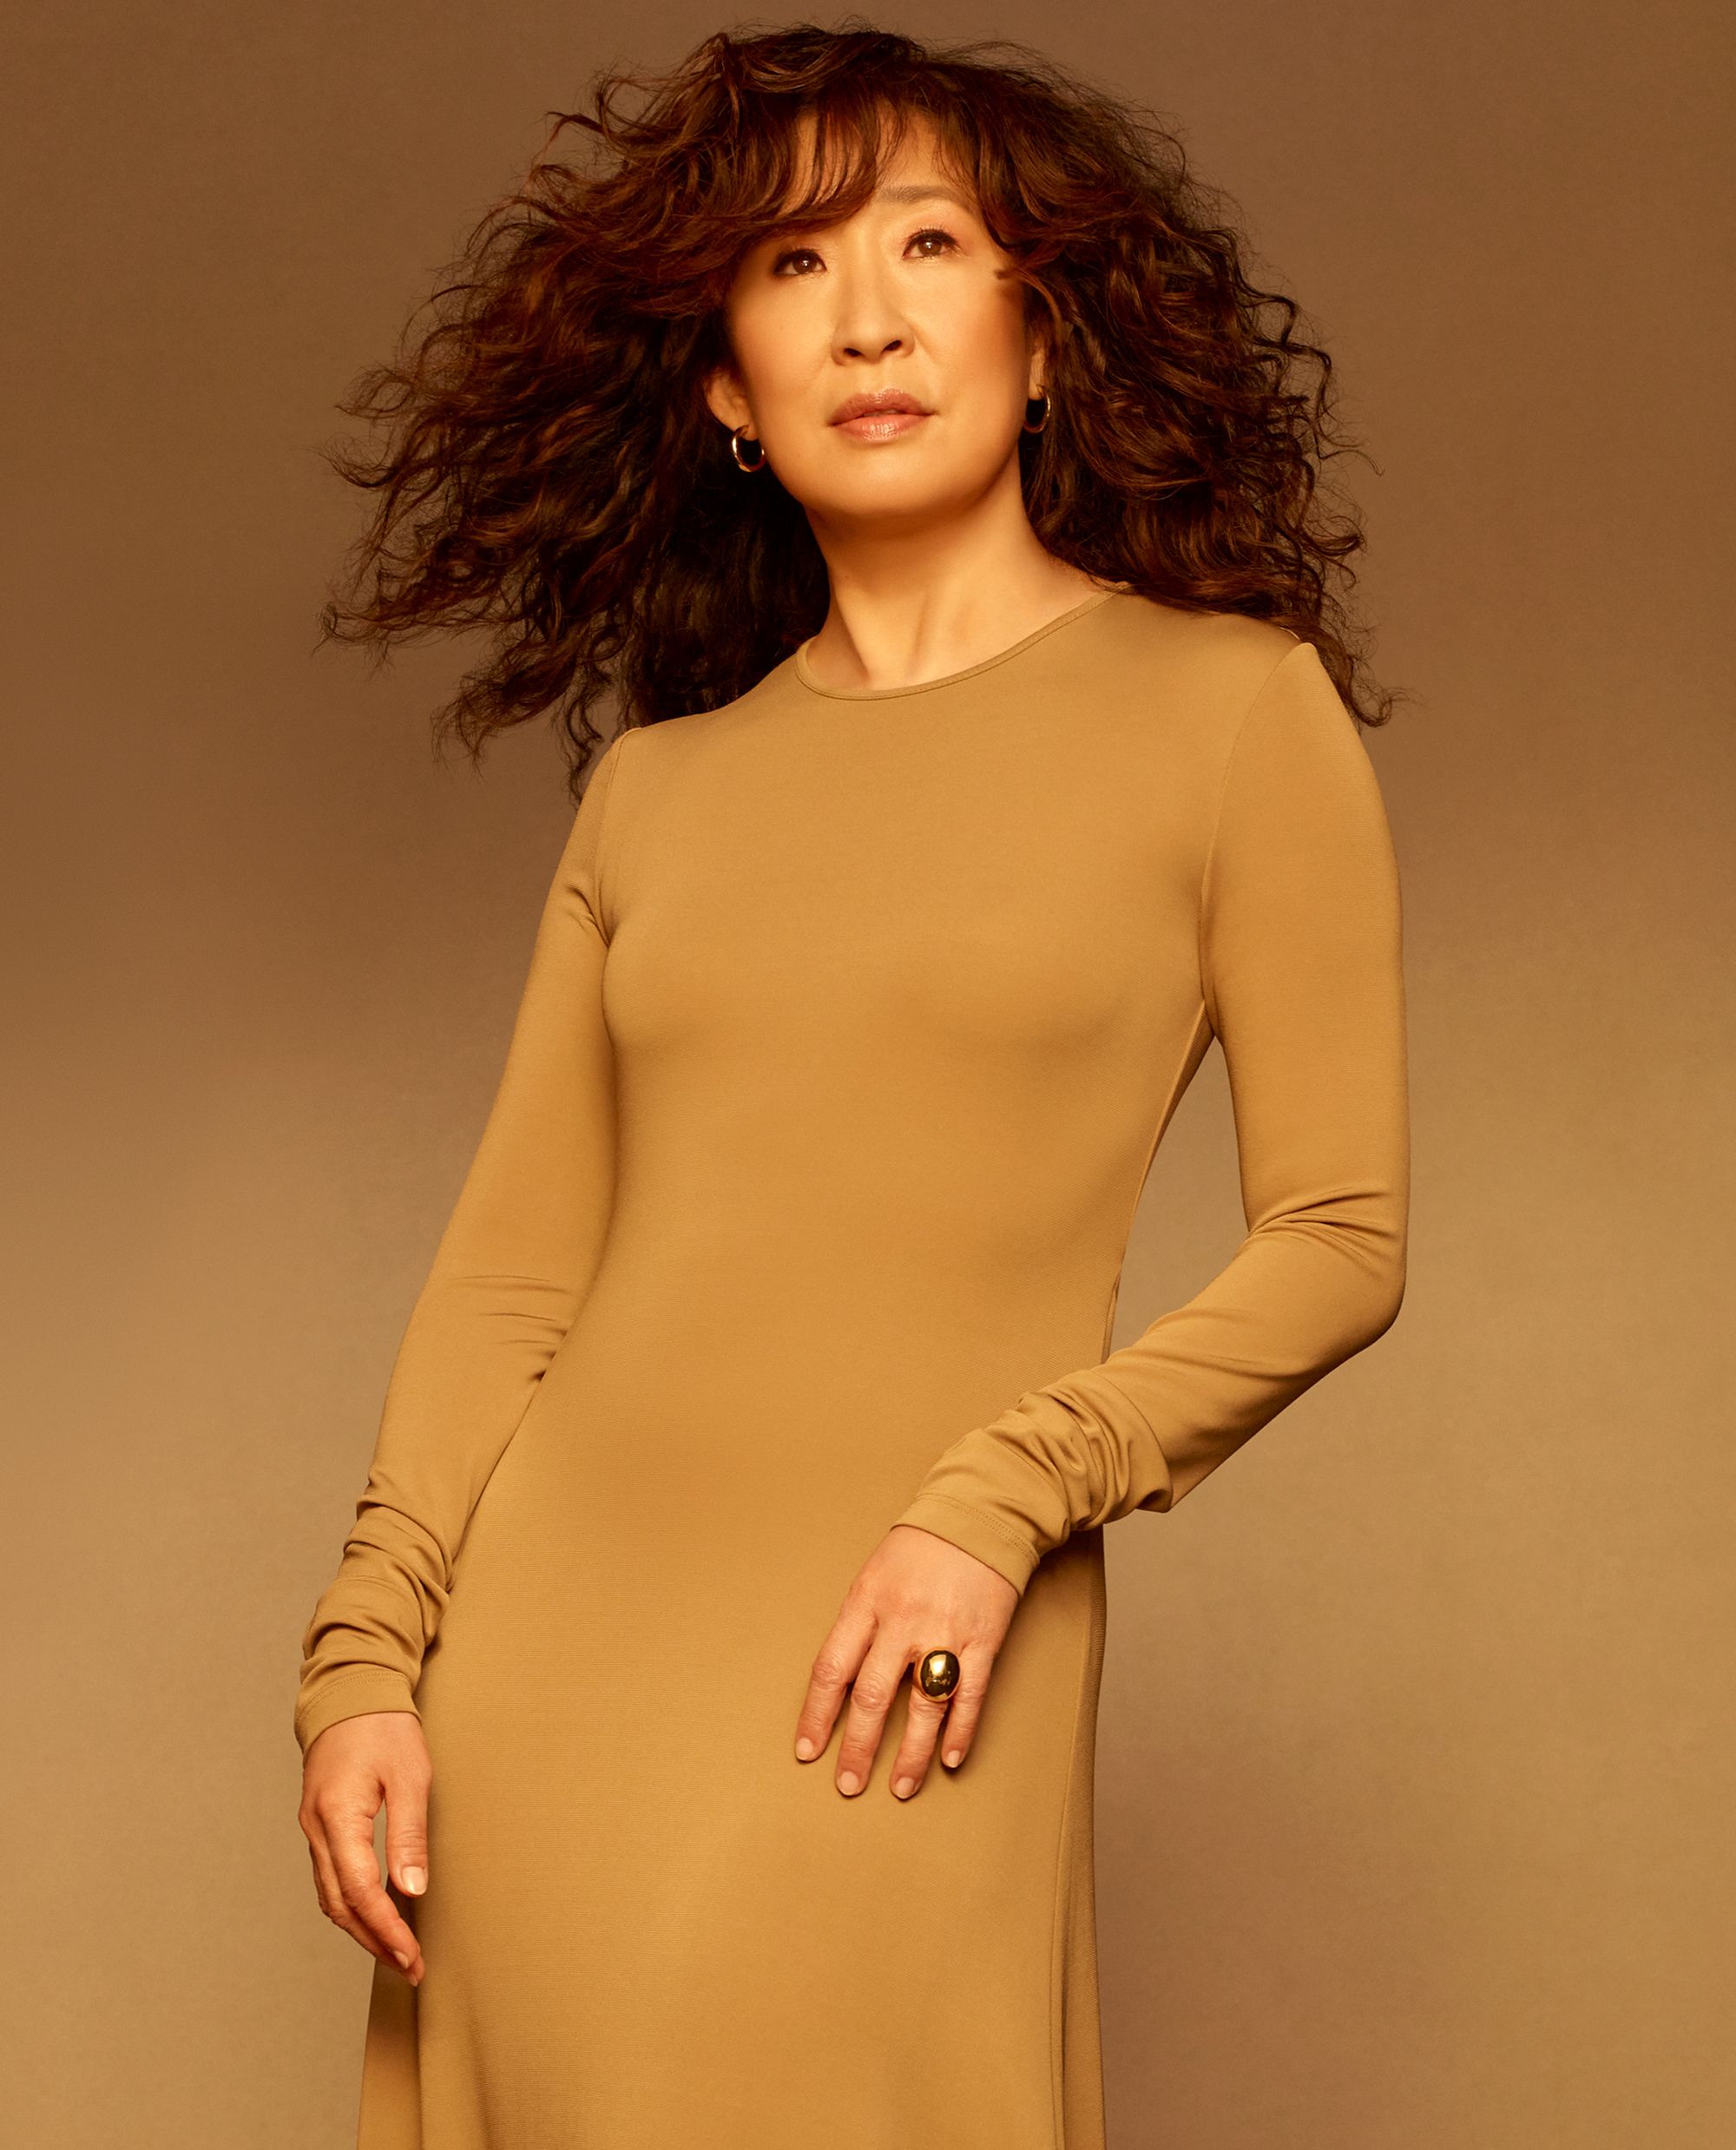 Sandra Oh Is Agitating for Real, Culture-Changing Inclusion Foto